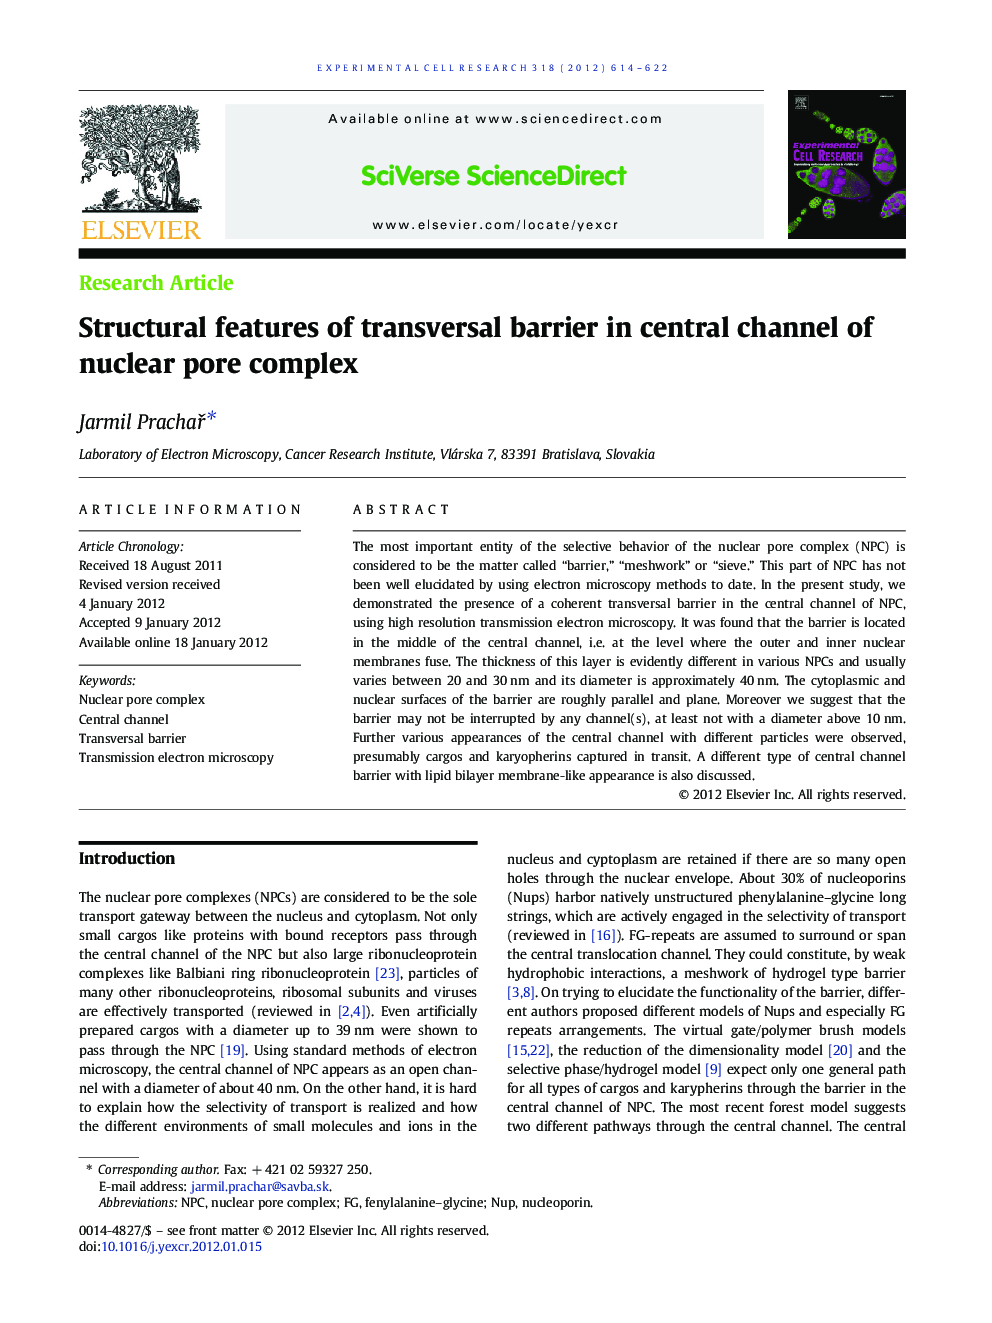 Structural features of transversal barrier in central channel of nuclear pore complex